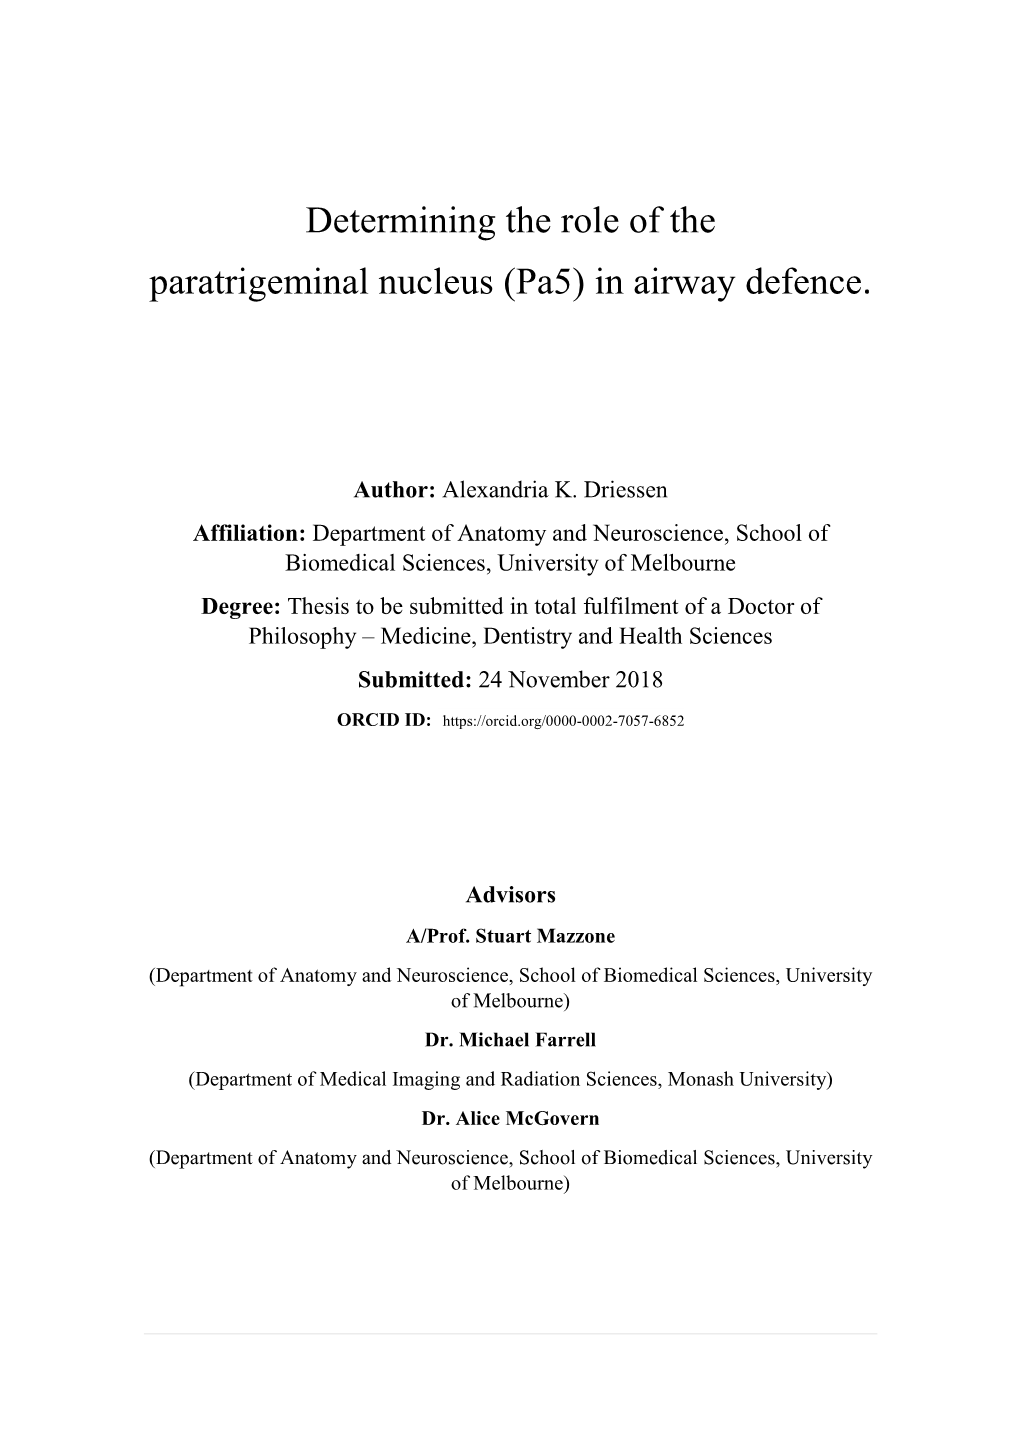 Determining the Role of the Paratrigeminal Nucleus (Pa5) in Airway Defence